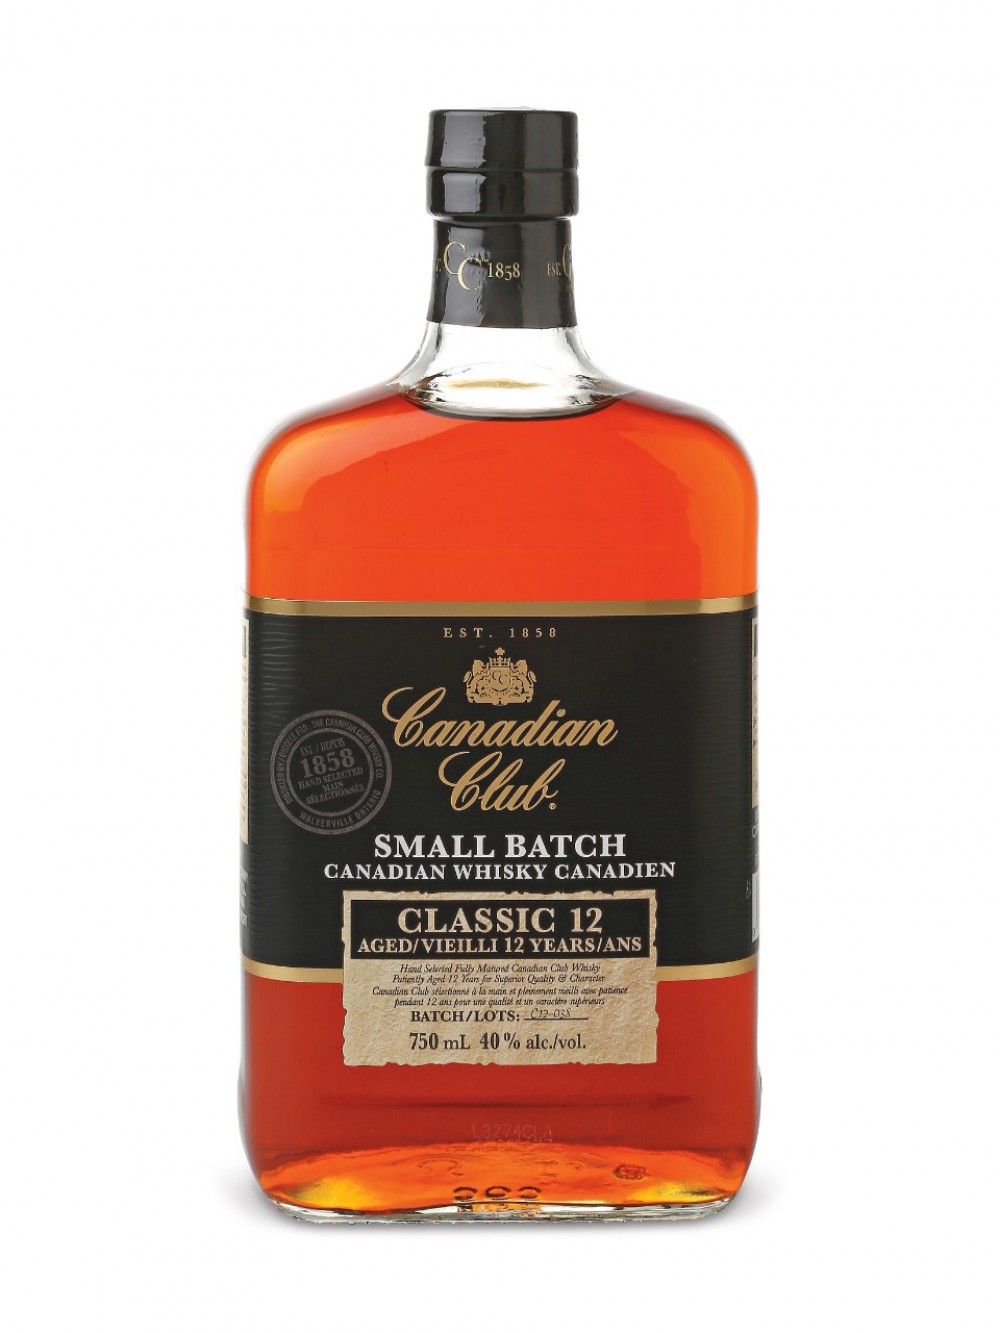 review-of-canadian-club-classic-12-year-old-by-megawatt-whisky-connosr